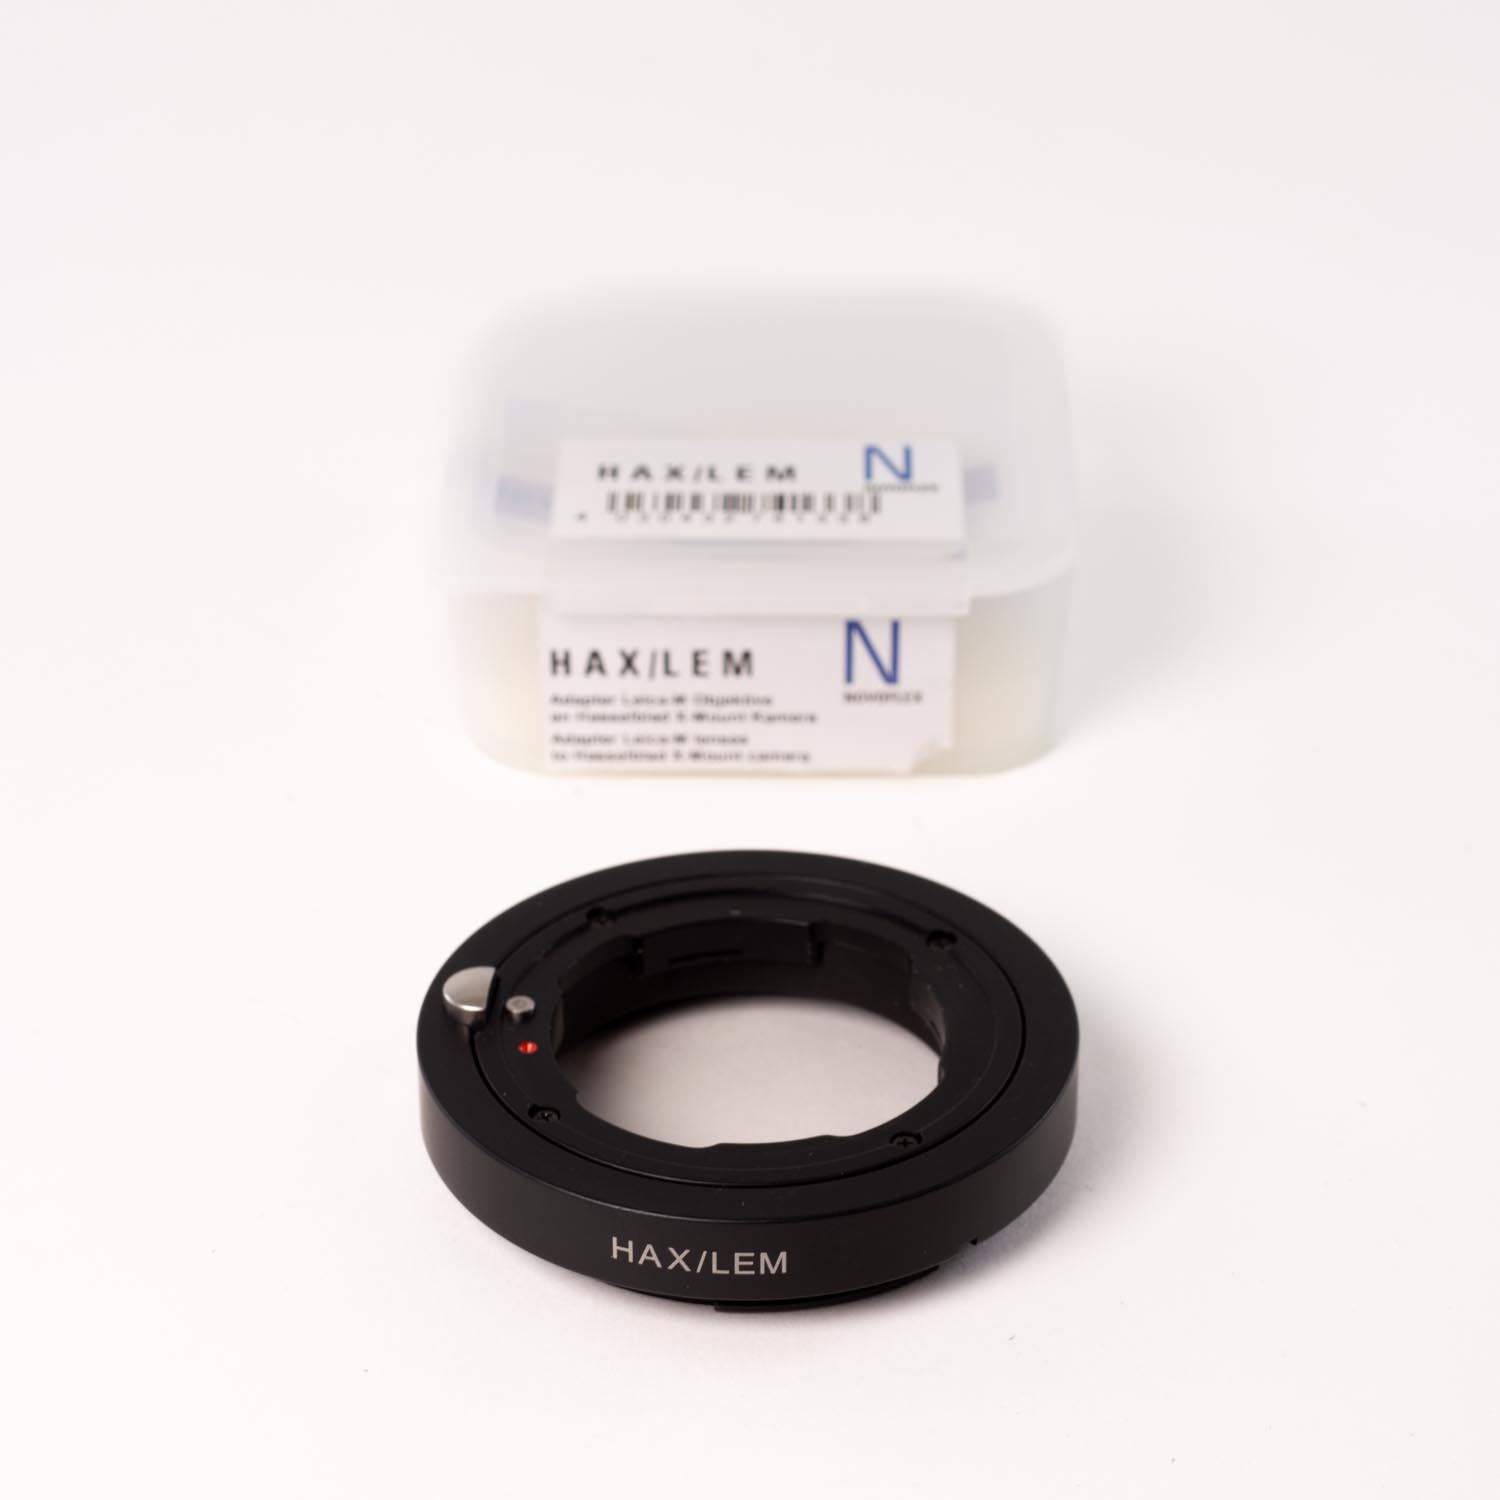 TThumbnail image for Novoflex Adapter Leica M lens to Hasselblad X Mount camera *A+*